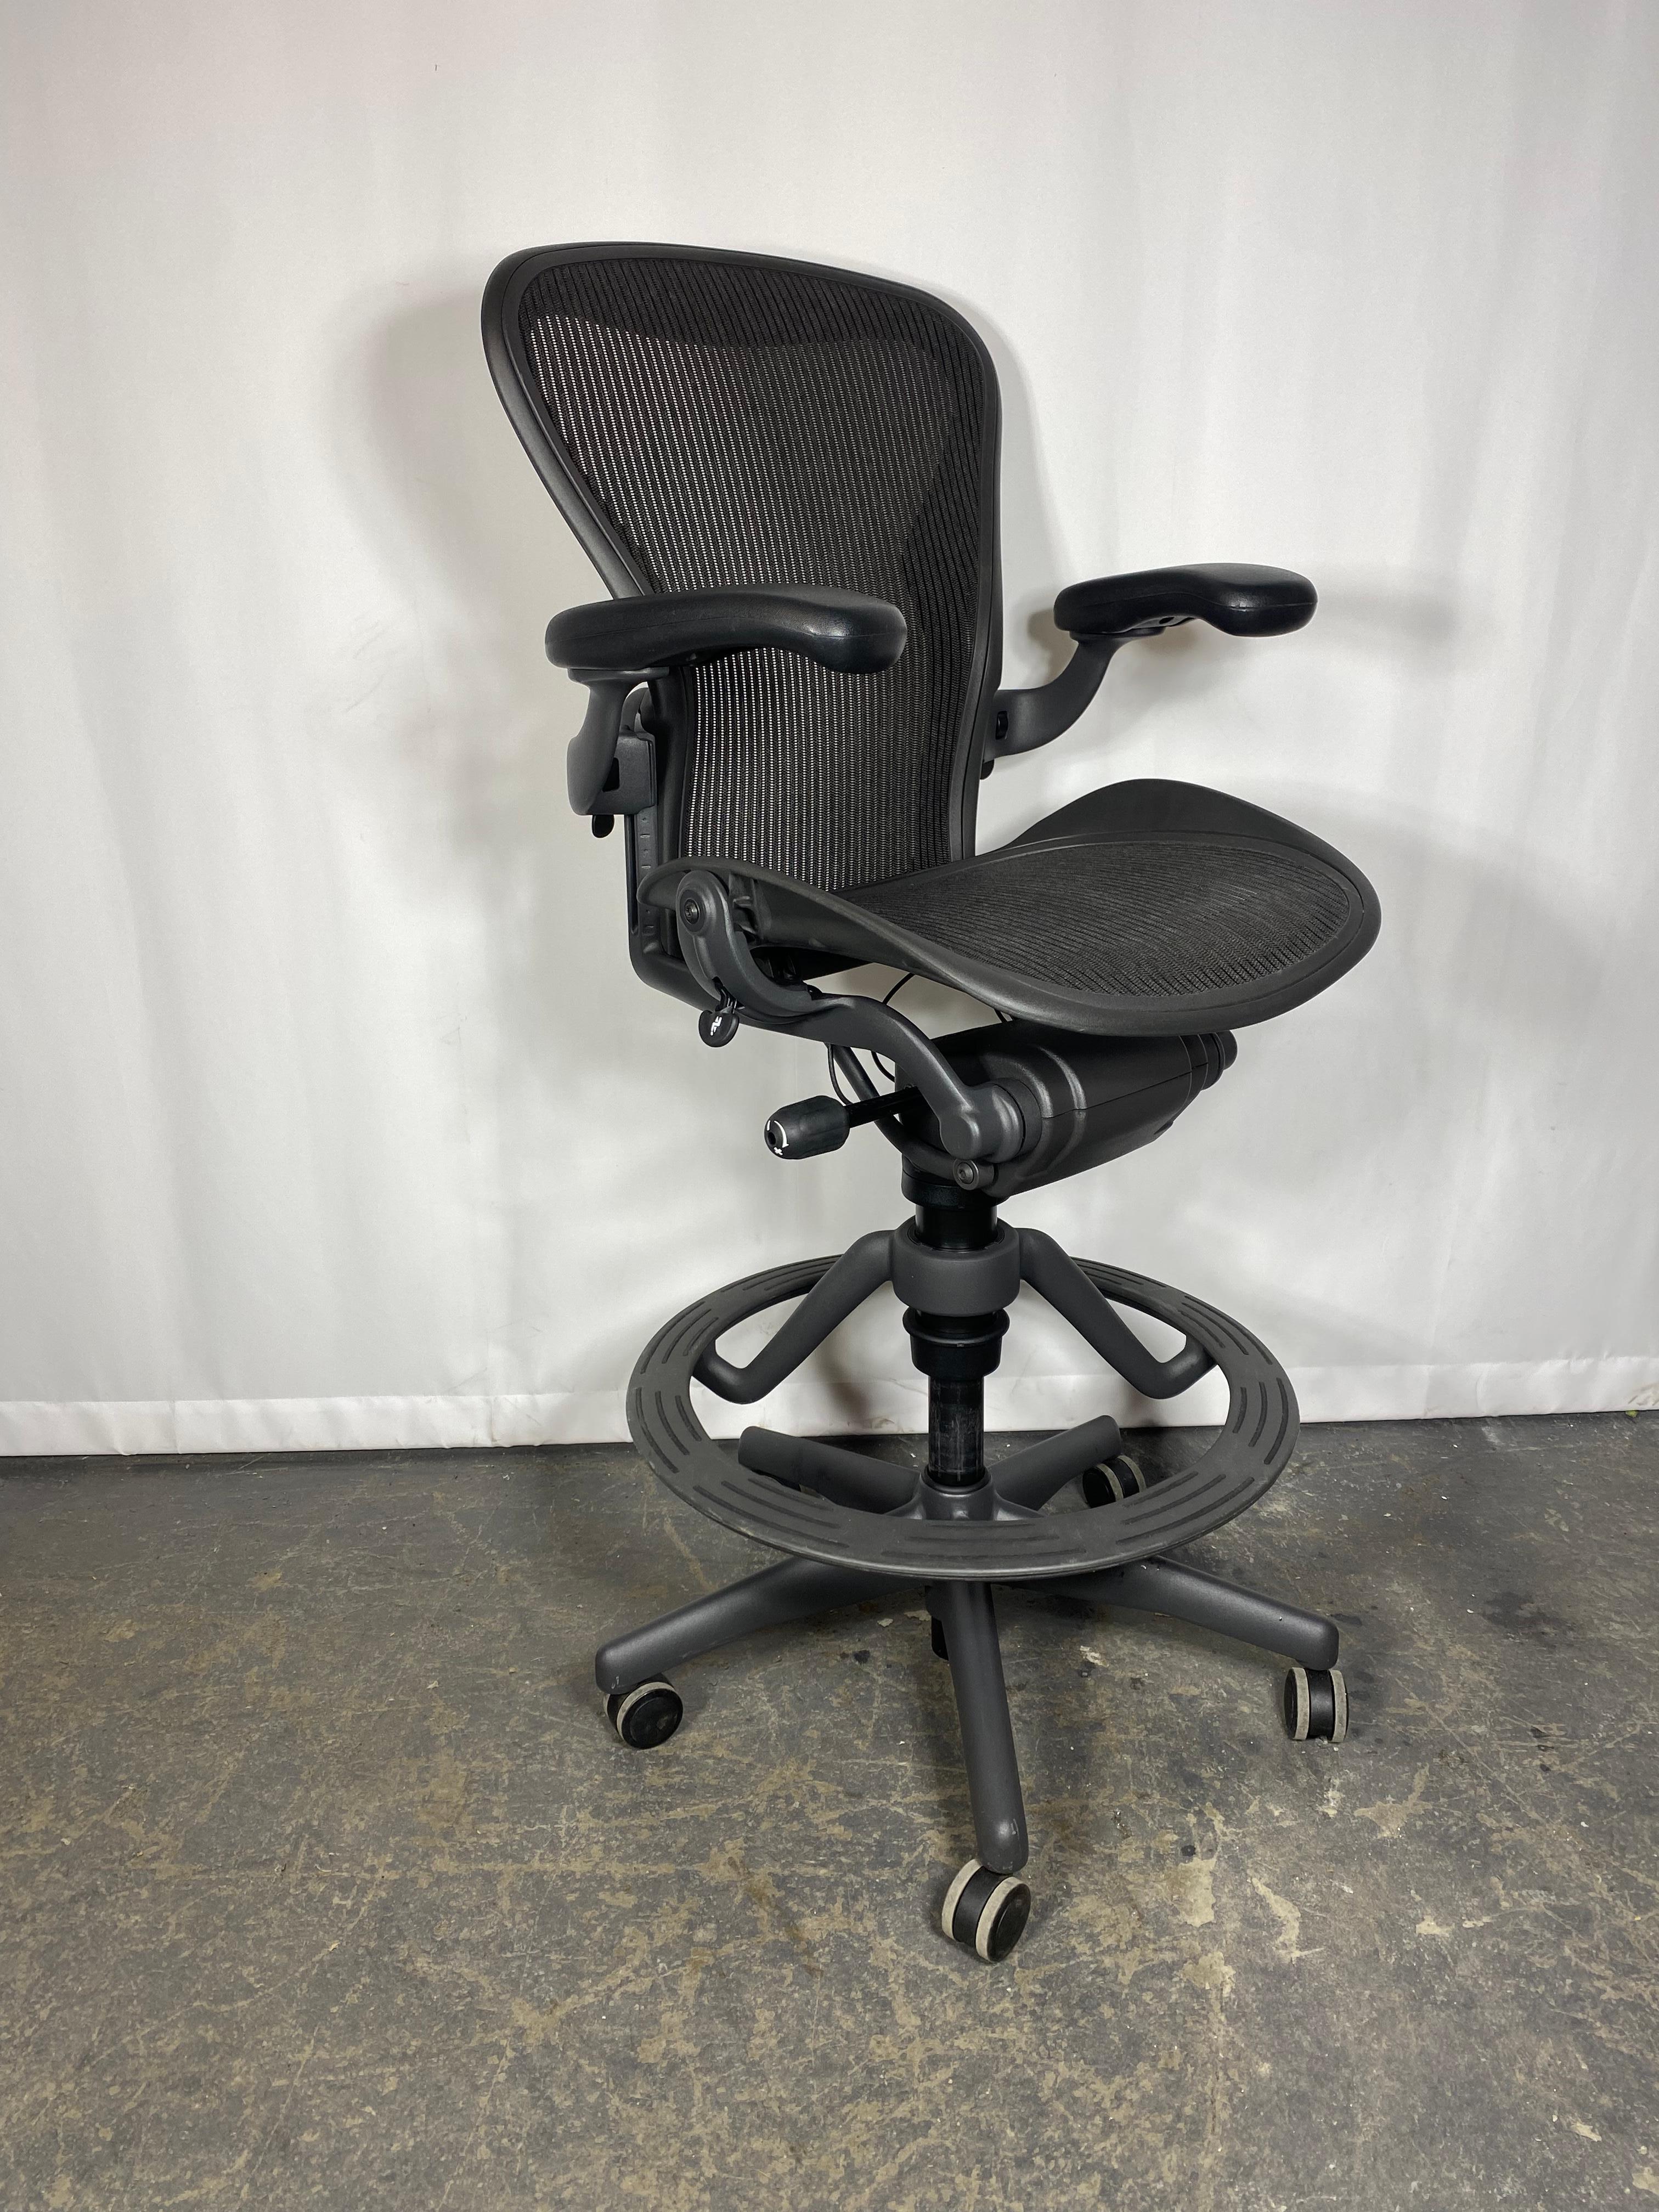 Aeron Chairs are state of the art assertions of elegance and ergonomic design, born from the creative and exacting minds at Herman Miller. The Aeron is at the vanguard of luxury and cutting edge technology. Used widely in fortune 500 companies and